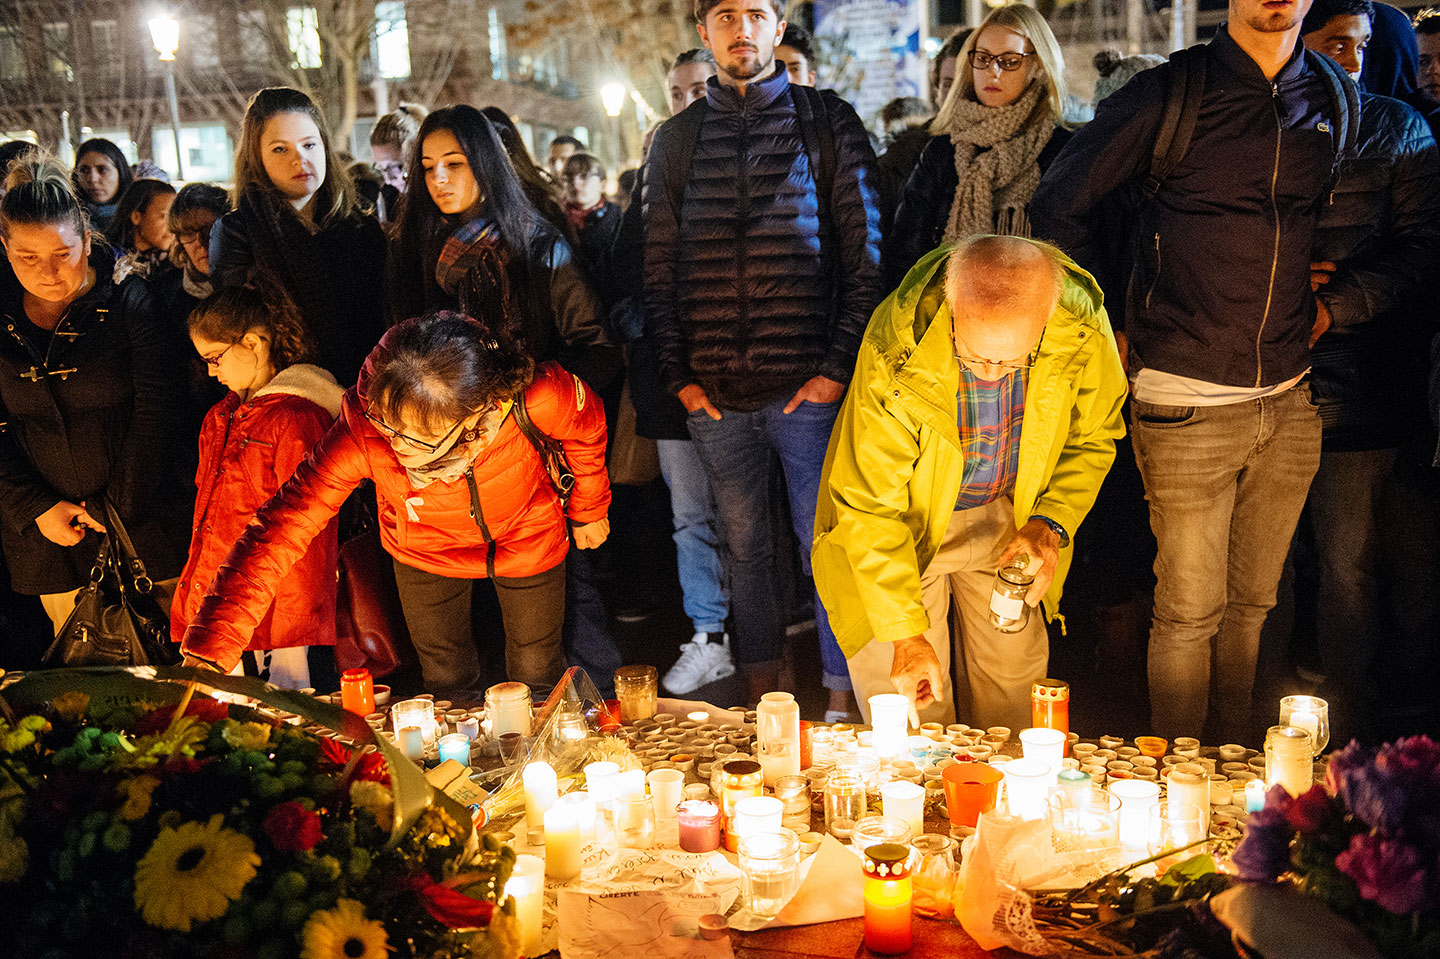 Mourners place candles at a memorial for victims of the 2015 Paris terror attacks.